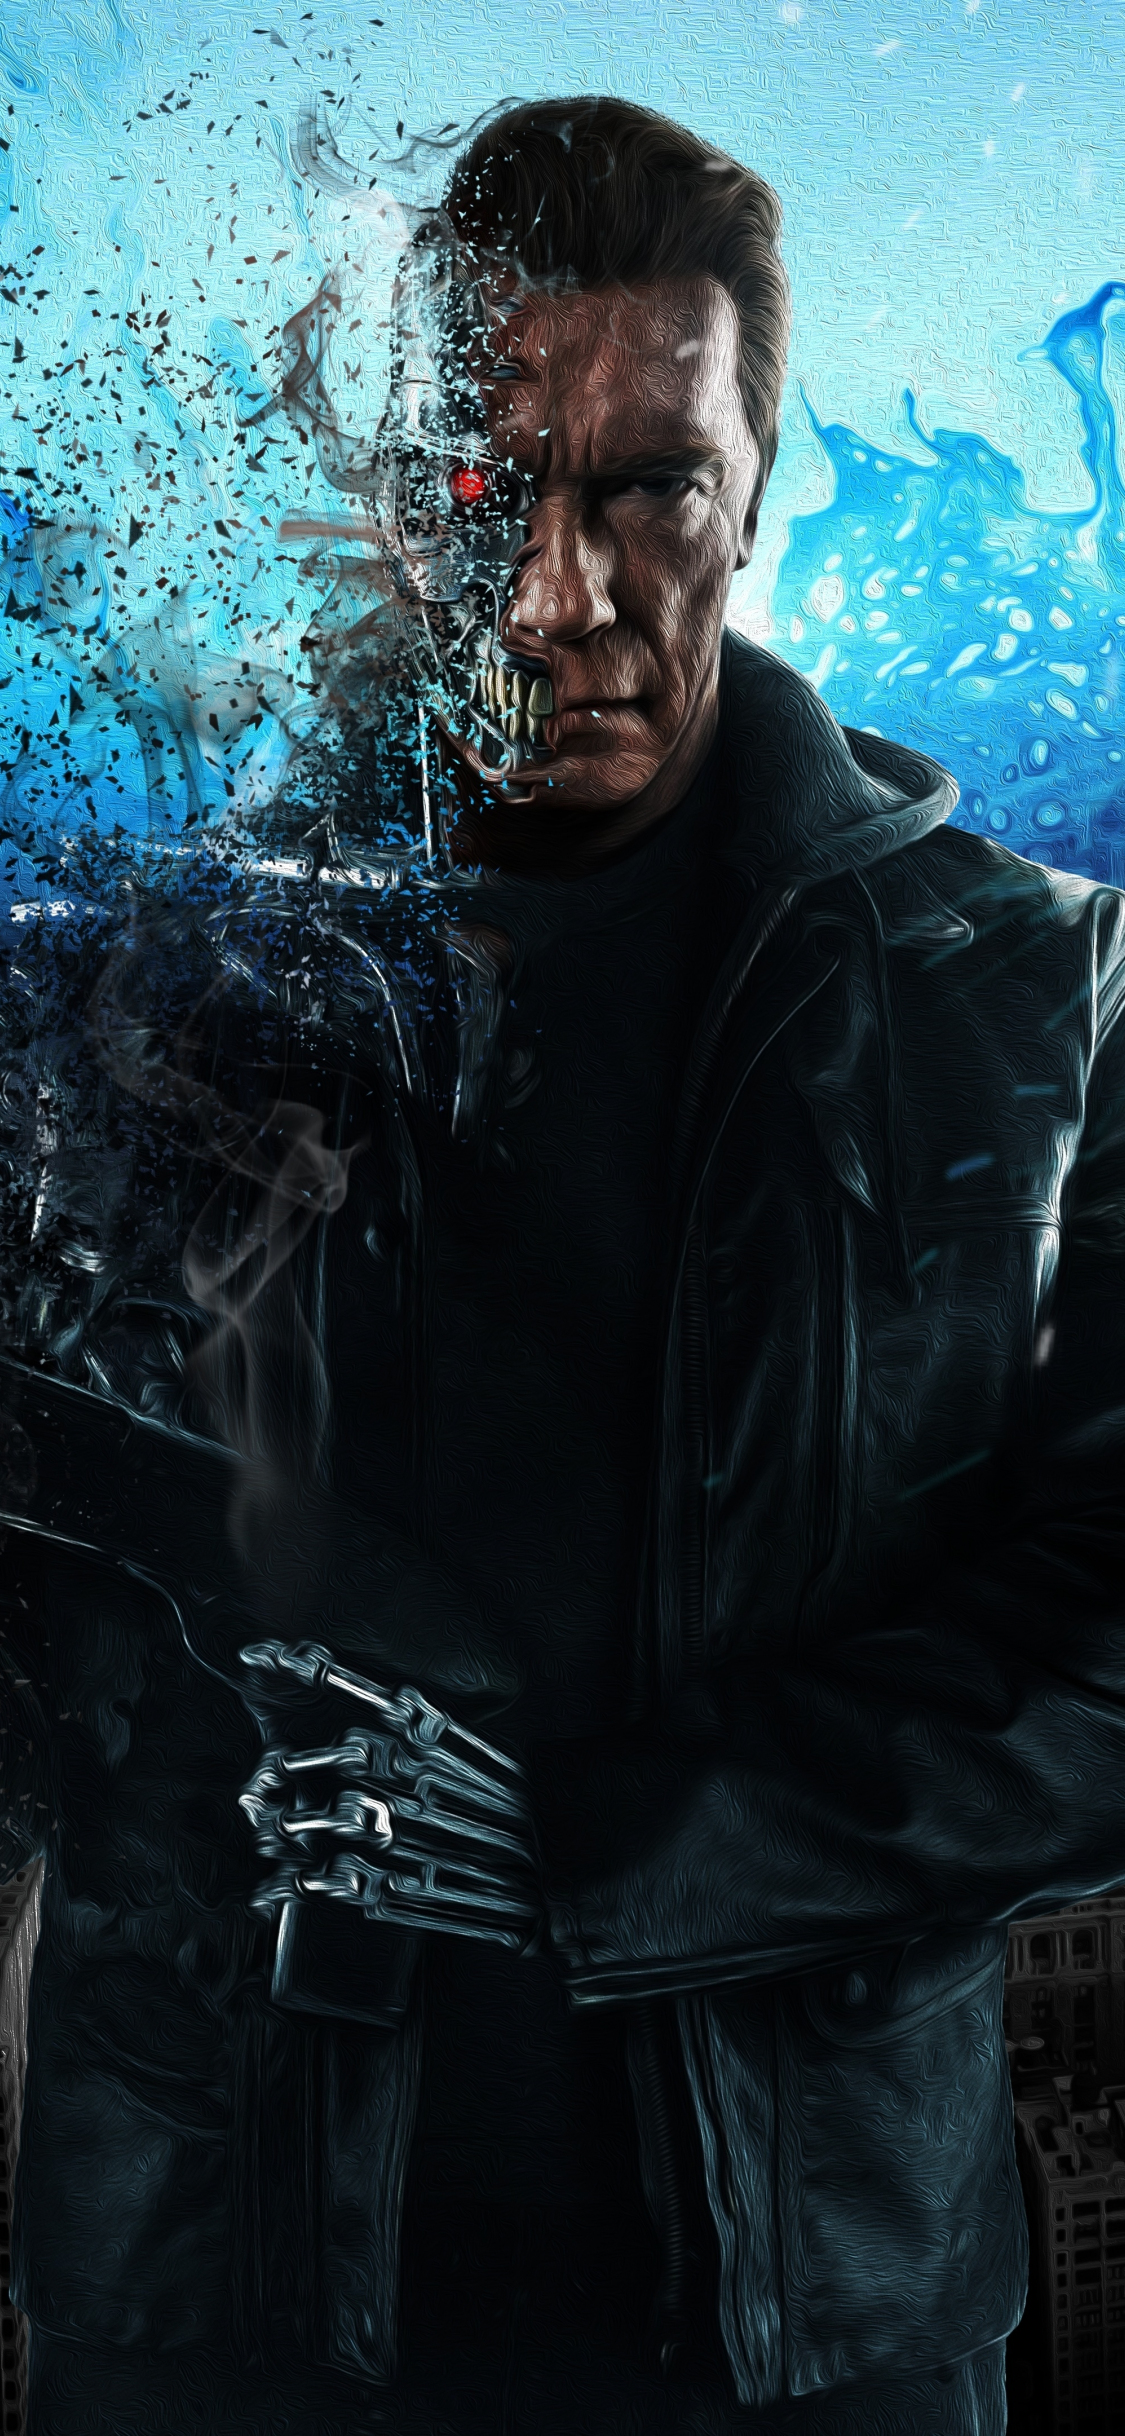 Download wallpaper 1125x2436 movie, the terminator, arnold, art, iphone x,  1125x2436 hd background, 26539